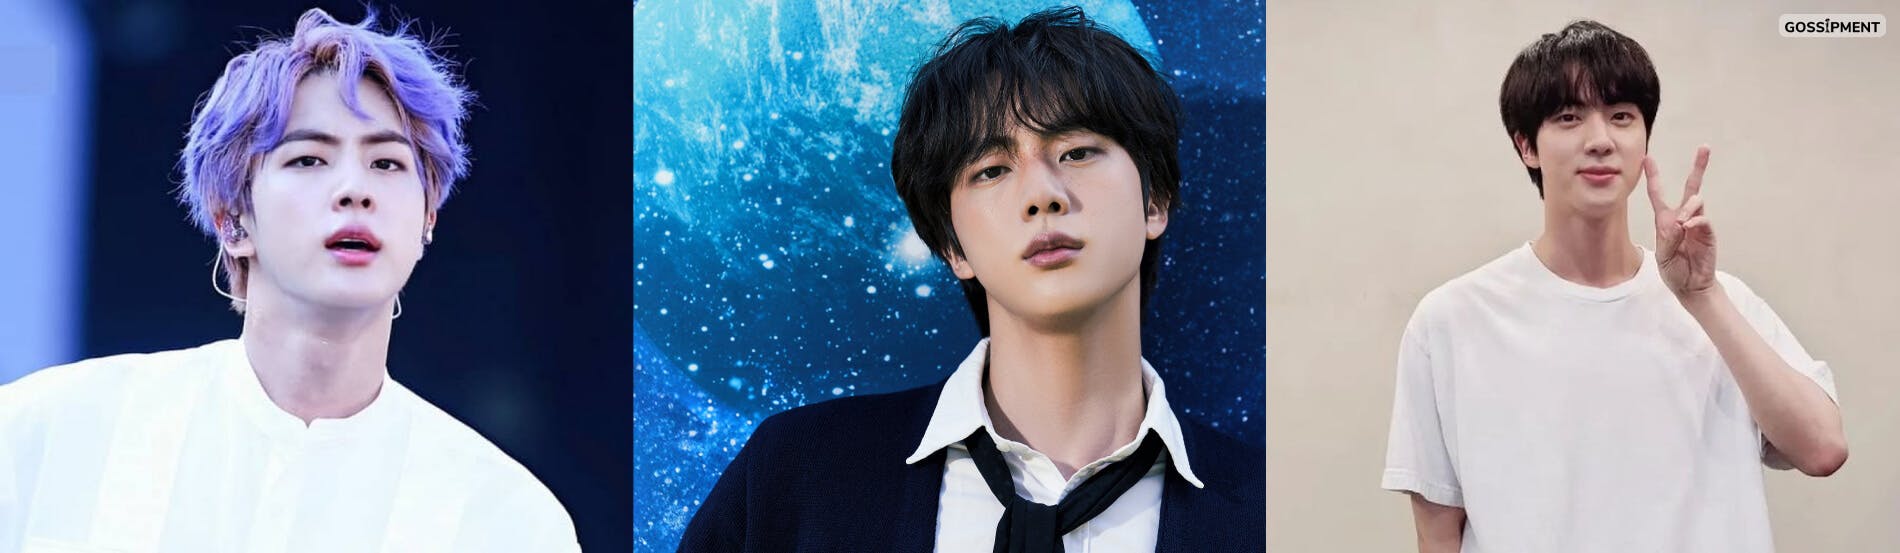 Cover Image for BTS Jin Drops His Solo The Astronaut With Coldplay Ahead Of Military Enlistment